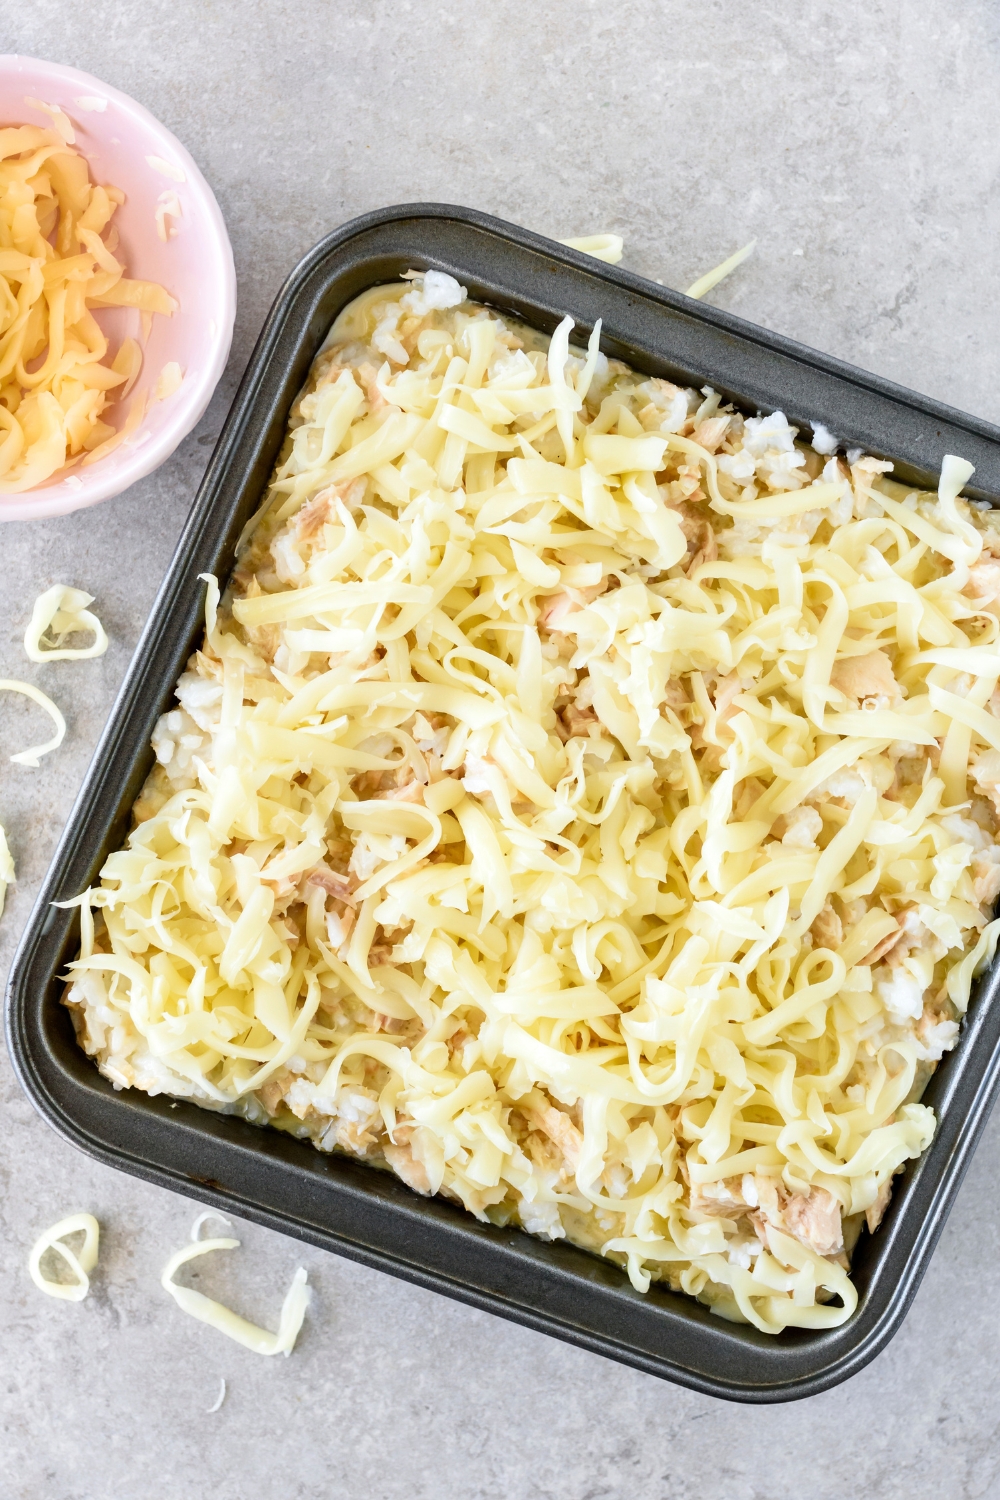 A baking dish filled with canned tuna and white rice covered in shredded cheese.